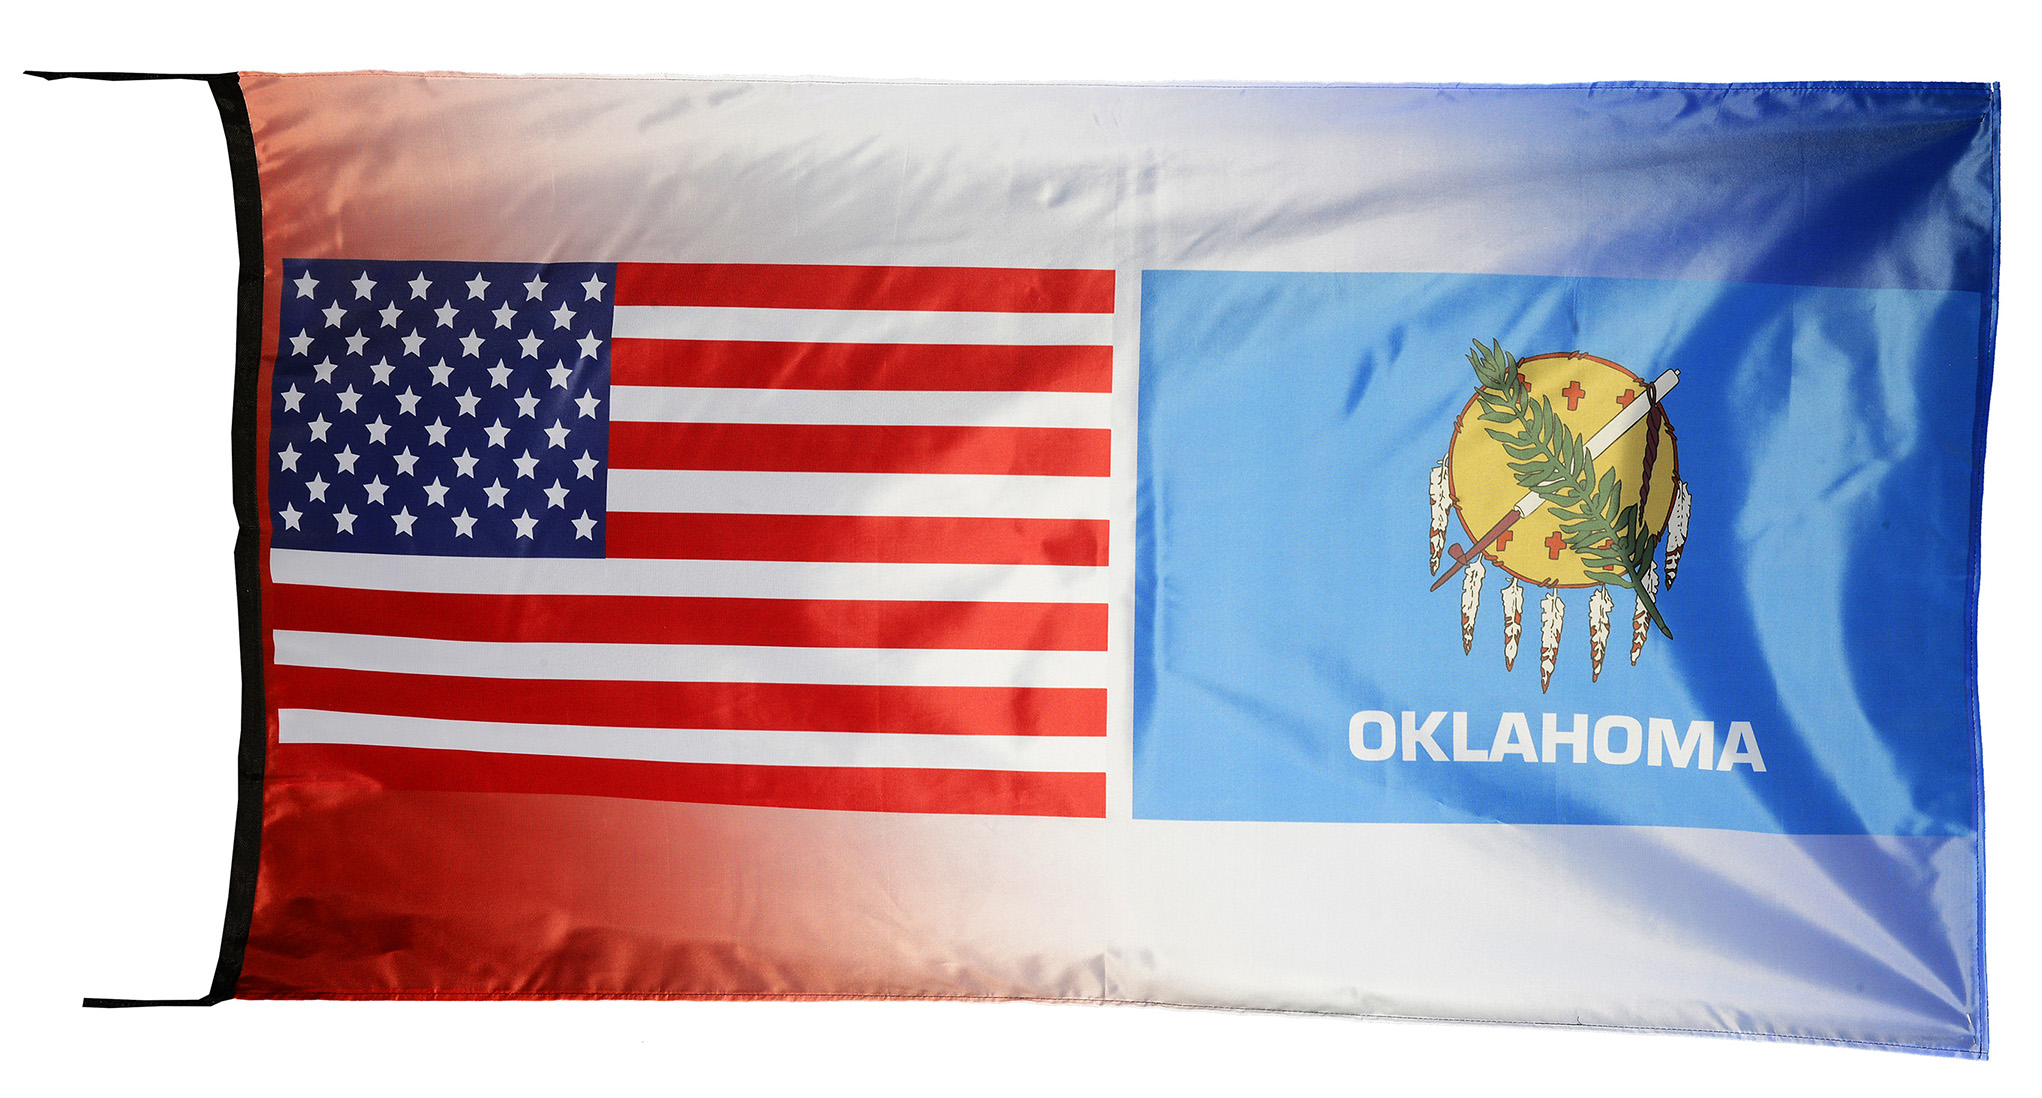 Flag  106 USA / US Country / United States Of America and Oklahoma State / Patriotic / Pride Hybrid Weather-Resistant Polyester Outdoor Flag Landscape Banner / Vivid Colors / 3 X 5 FT (150 x 90cm) International Flags for Sale